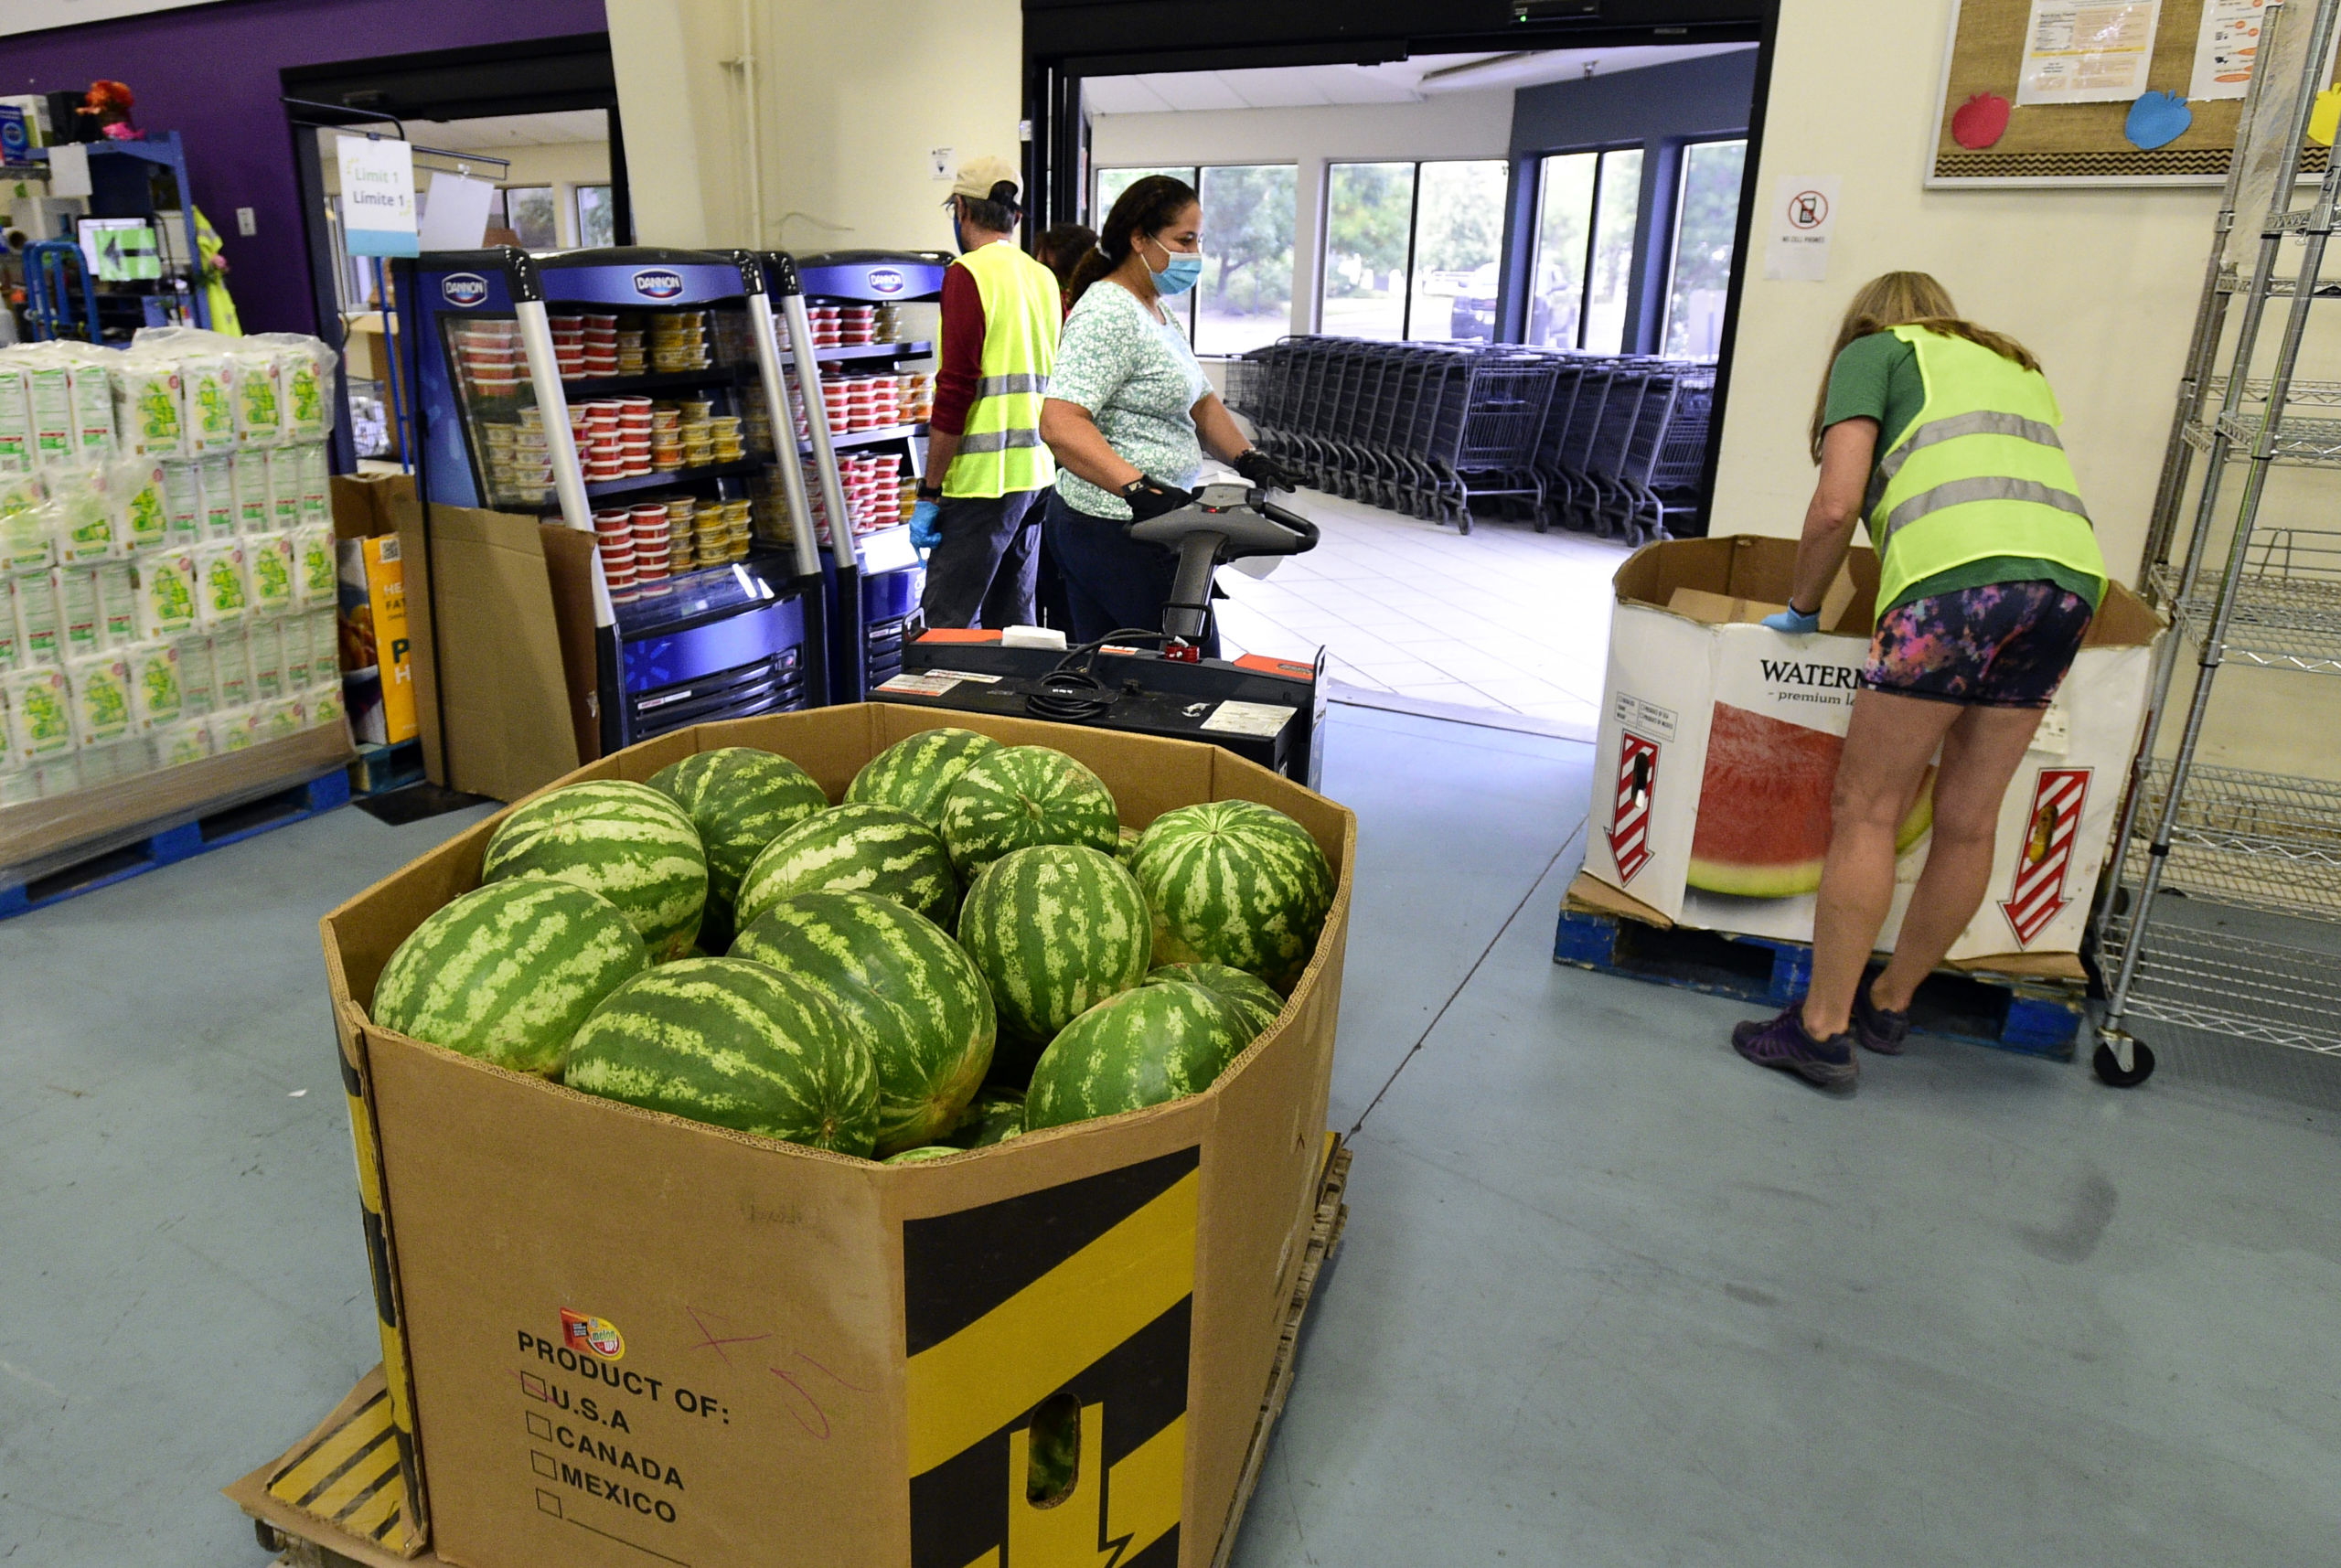 A carton of watermelons sits in the middle of the food pantry floor